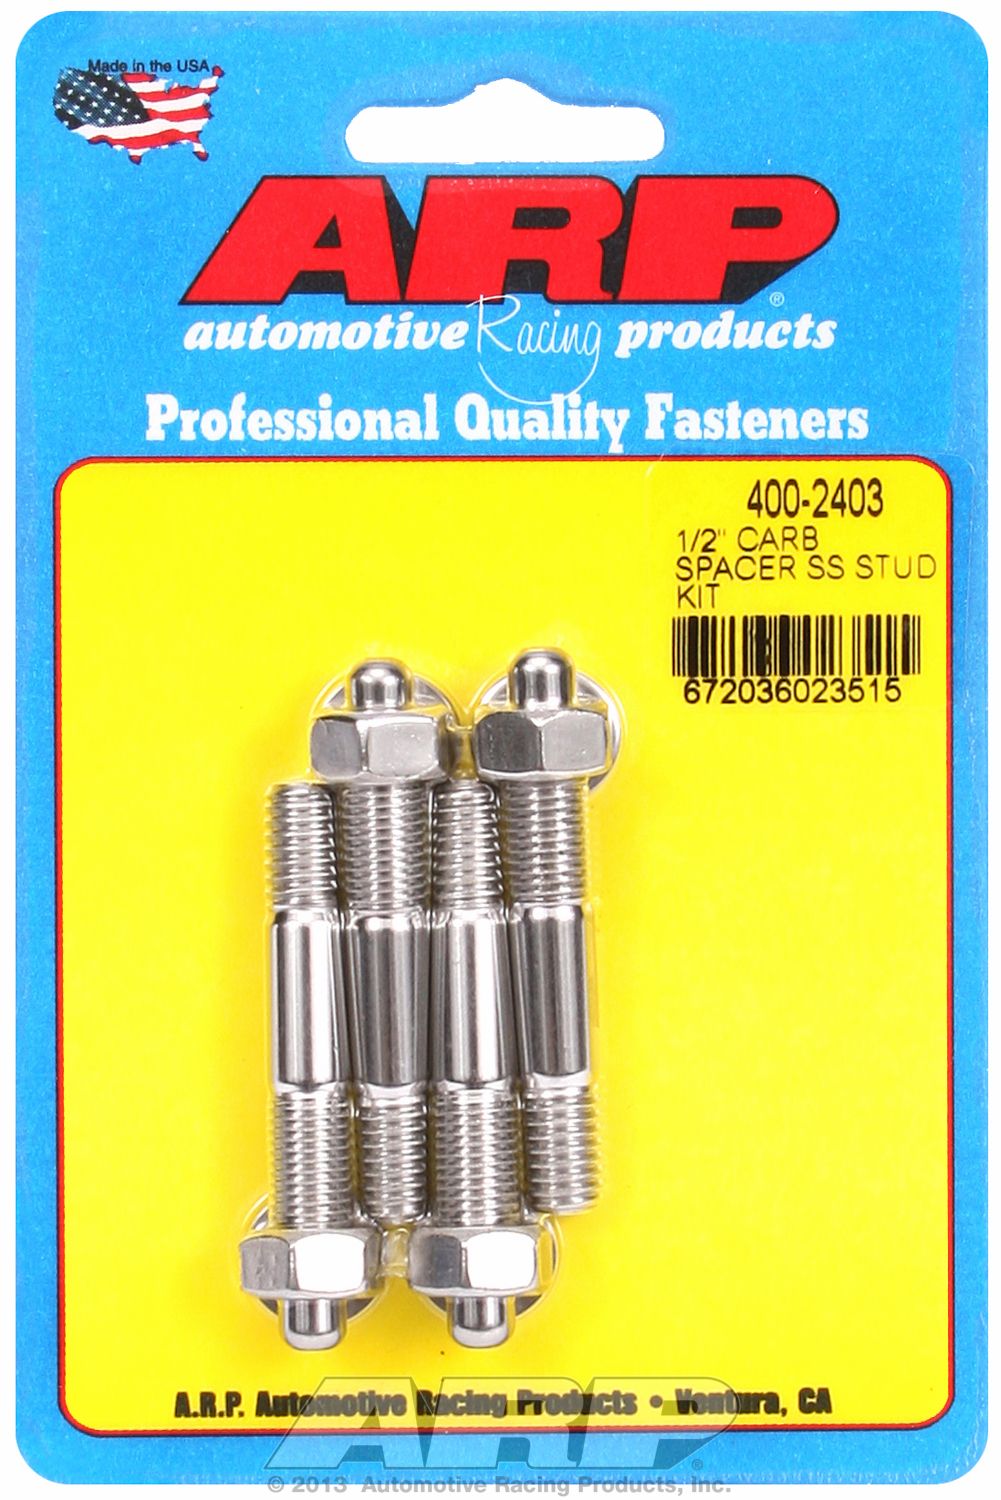 1/2' CARB SPACER SS STUD